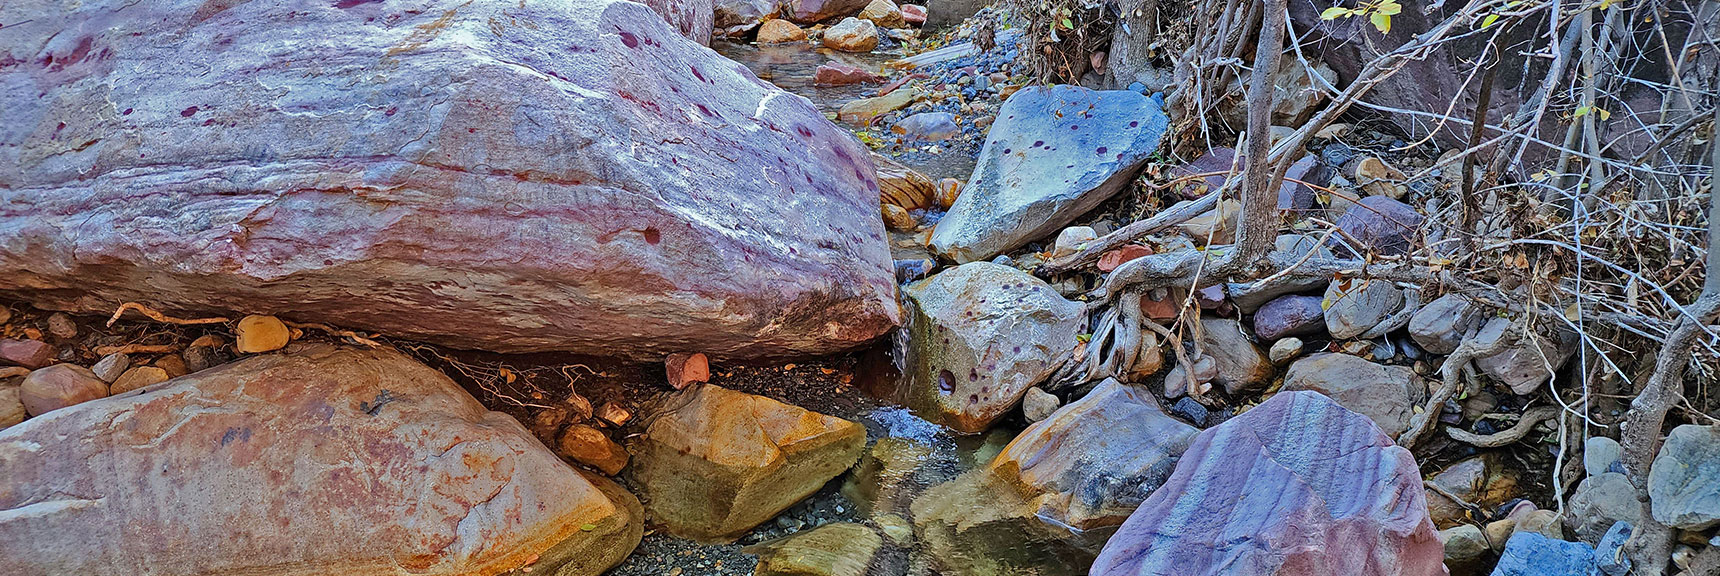 Crossing Pine Creek in the Base of the Canyon's South Branch. | Rock Climber Observations | Pine Creek Canyon | Rainbow Mountain Wilderness, Nevada